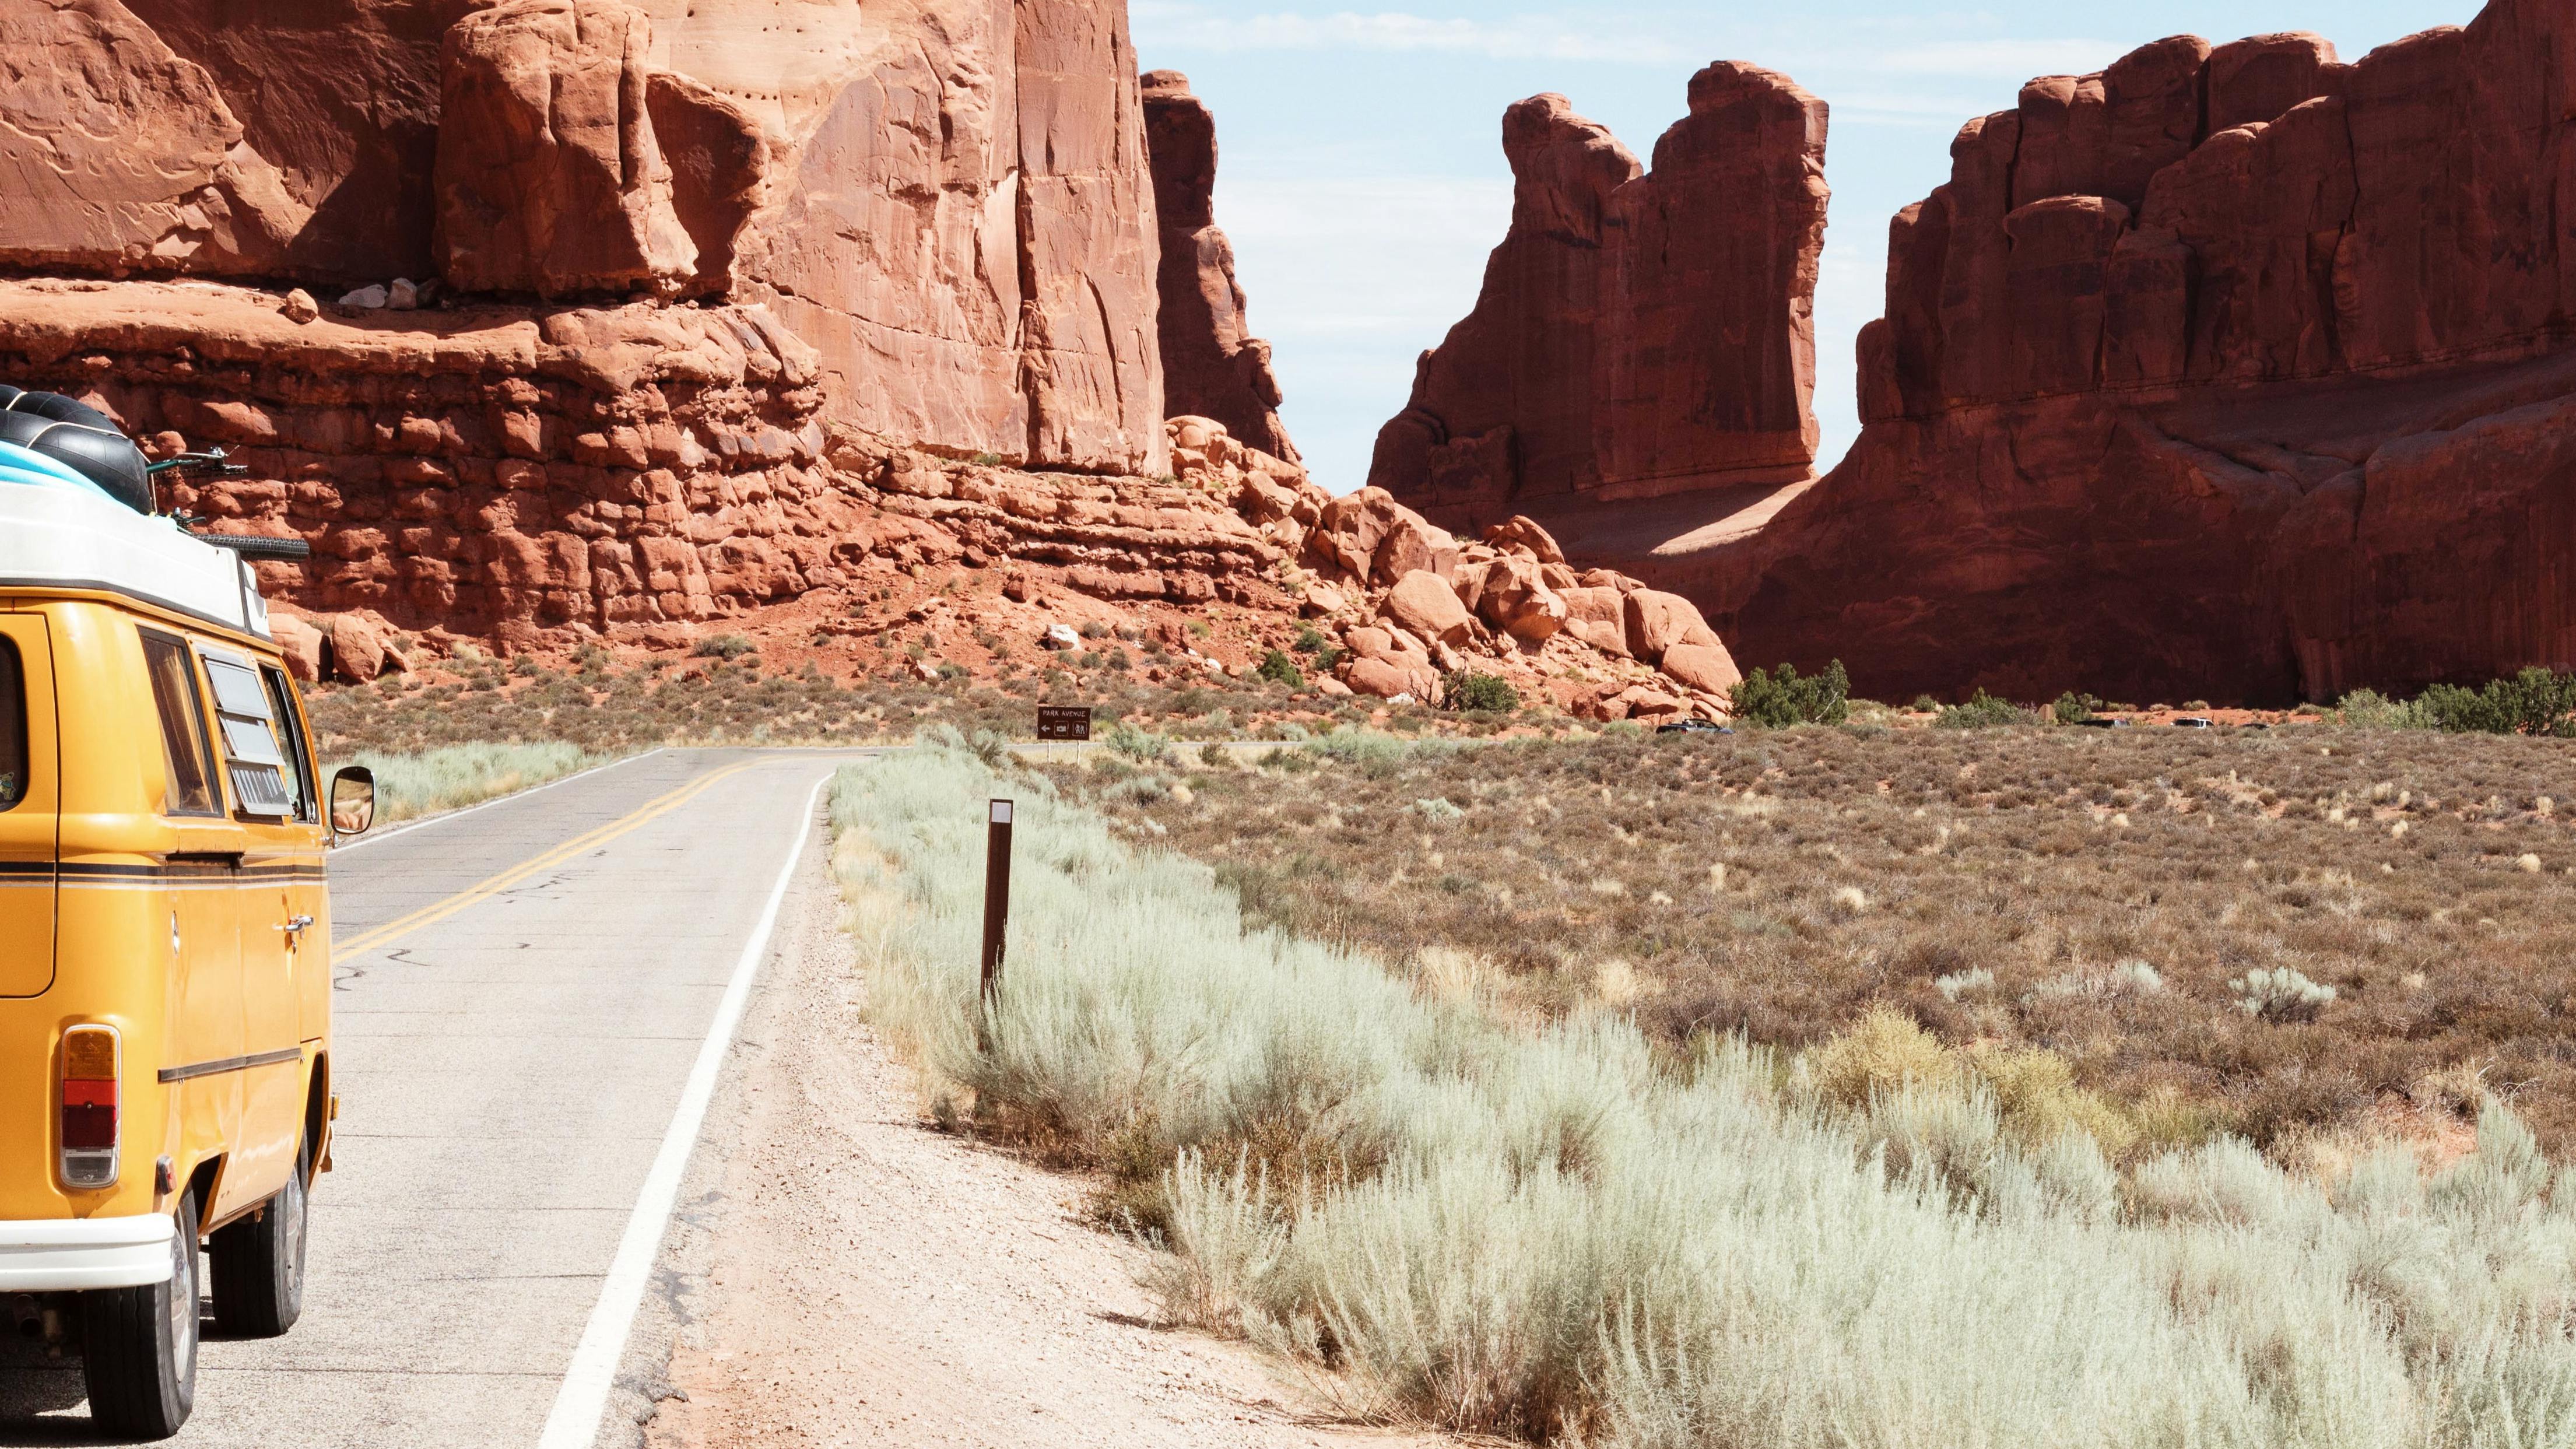 An orange van drives in a red rock canyon.